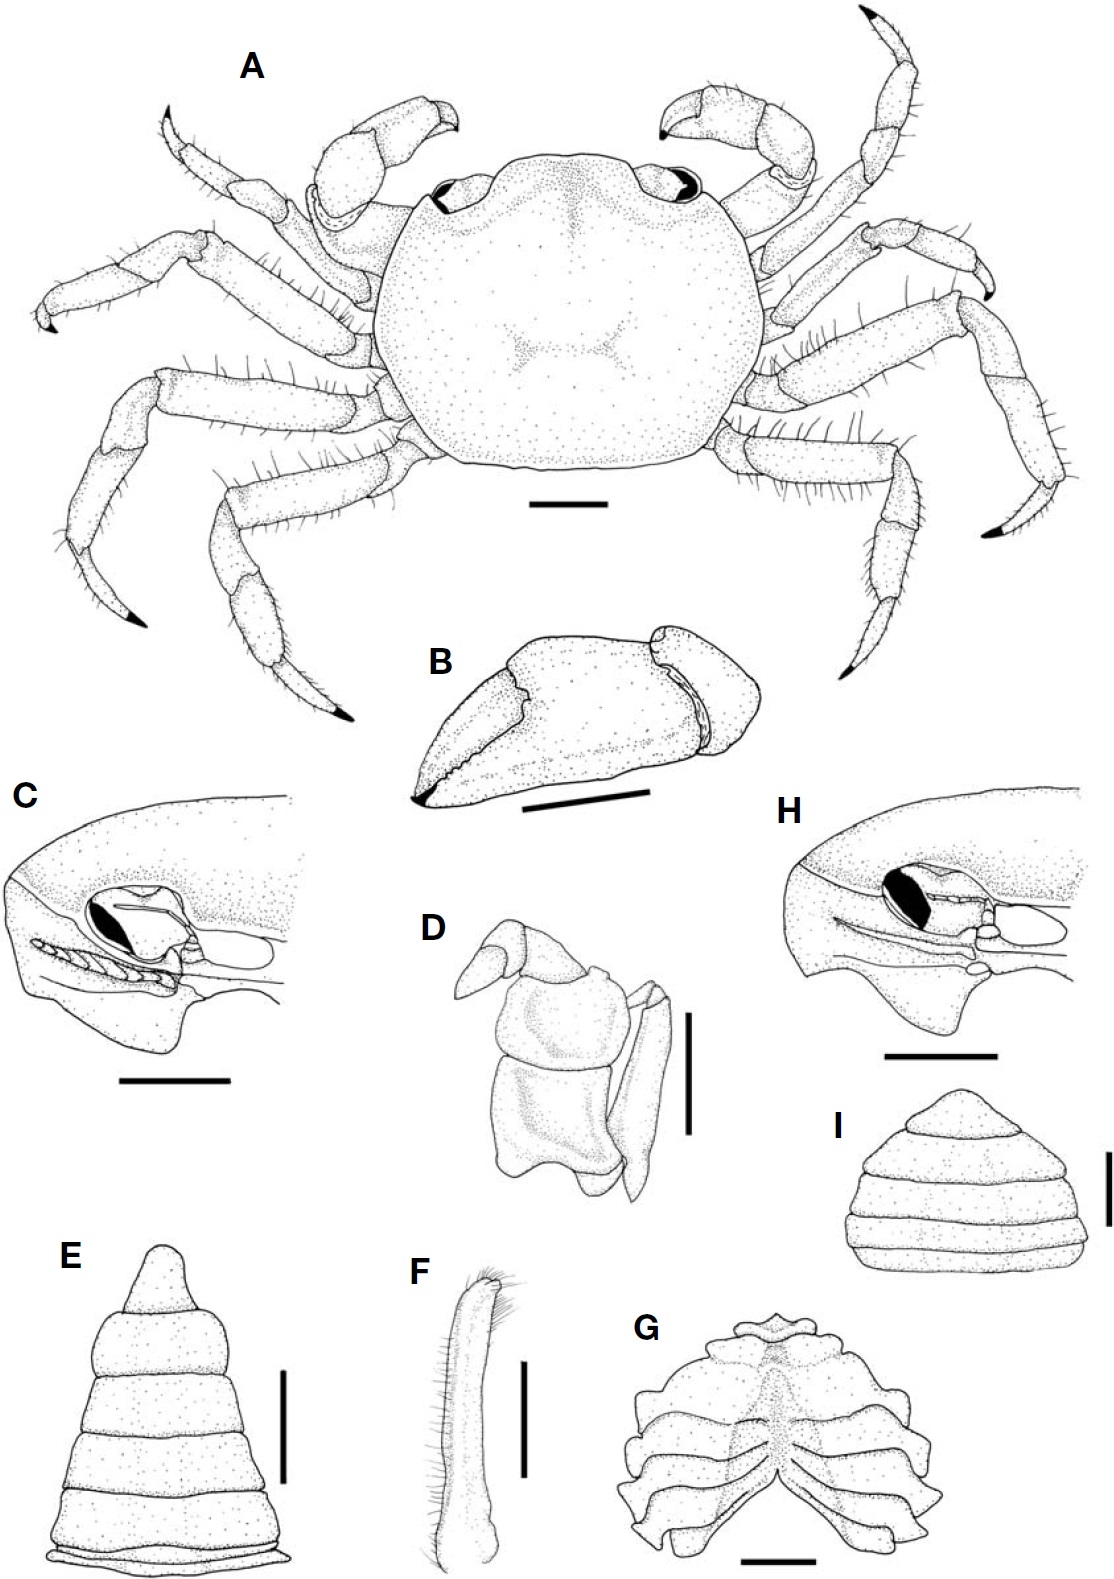 Sestostroma toriumii (Takeda, 1974), male (CL 4.8 mm, CW 5.7 mm). A, Whole crab, dorsal view; B, Left cheliped, outer view; C, Frontal view of orbital region with suborbital crest; D, Left third maxilliped; E, Abdomen; F, First gonopod, external view; G, Sternal plates; H, Frontal view of orbital region with suborbital crest, female (CL 4.4 mm, CW 5.1 mm); I, Abdomen, female. CL, carapace length from the front to the posterior dorsal margin of the carapace; CW, width of the carapace measured at the widest part. Scale bars: A-C, E, G-I=1 mm, D, F=0.5 mm.